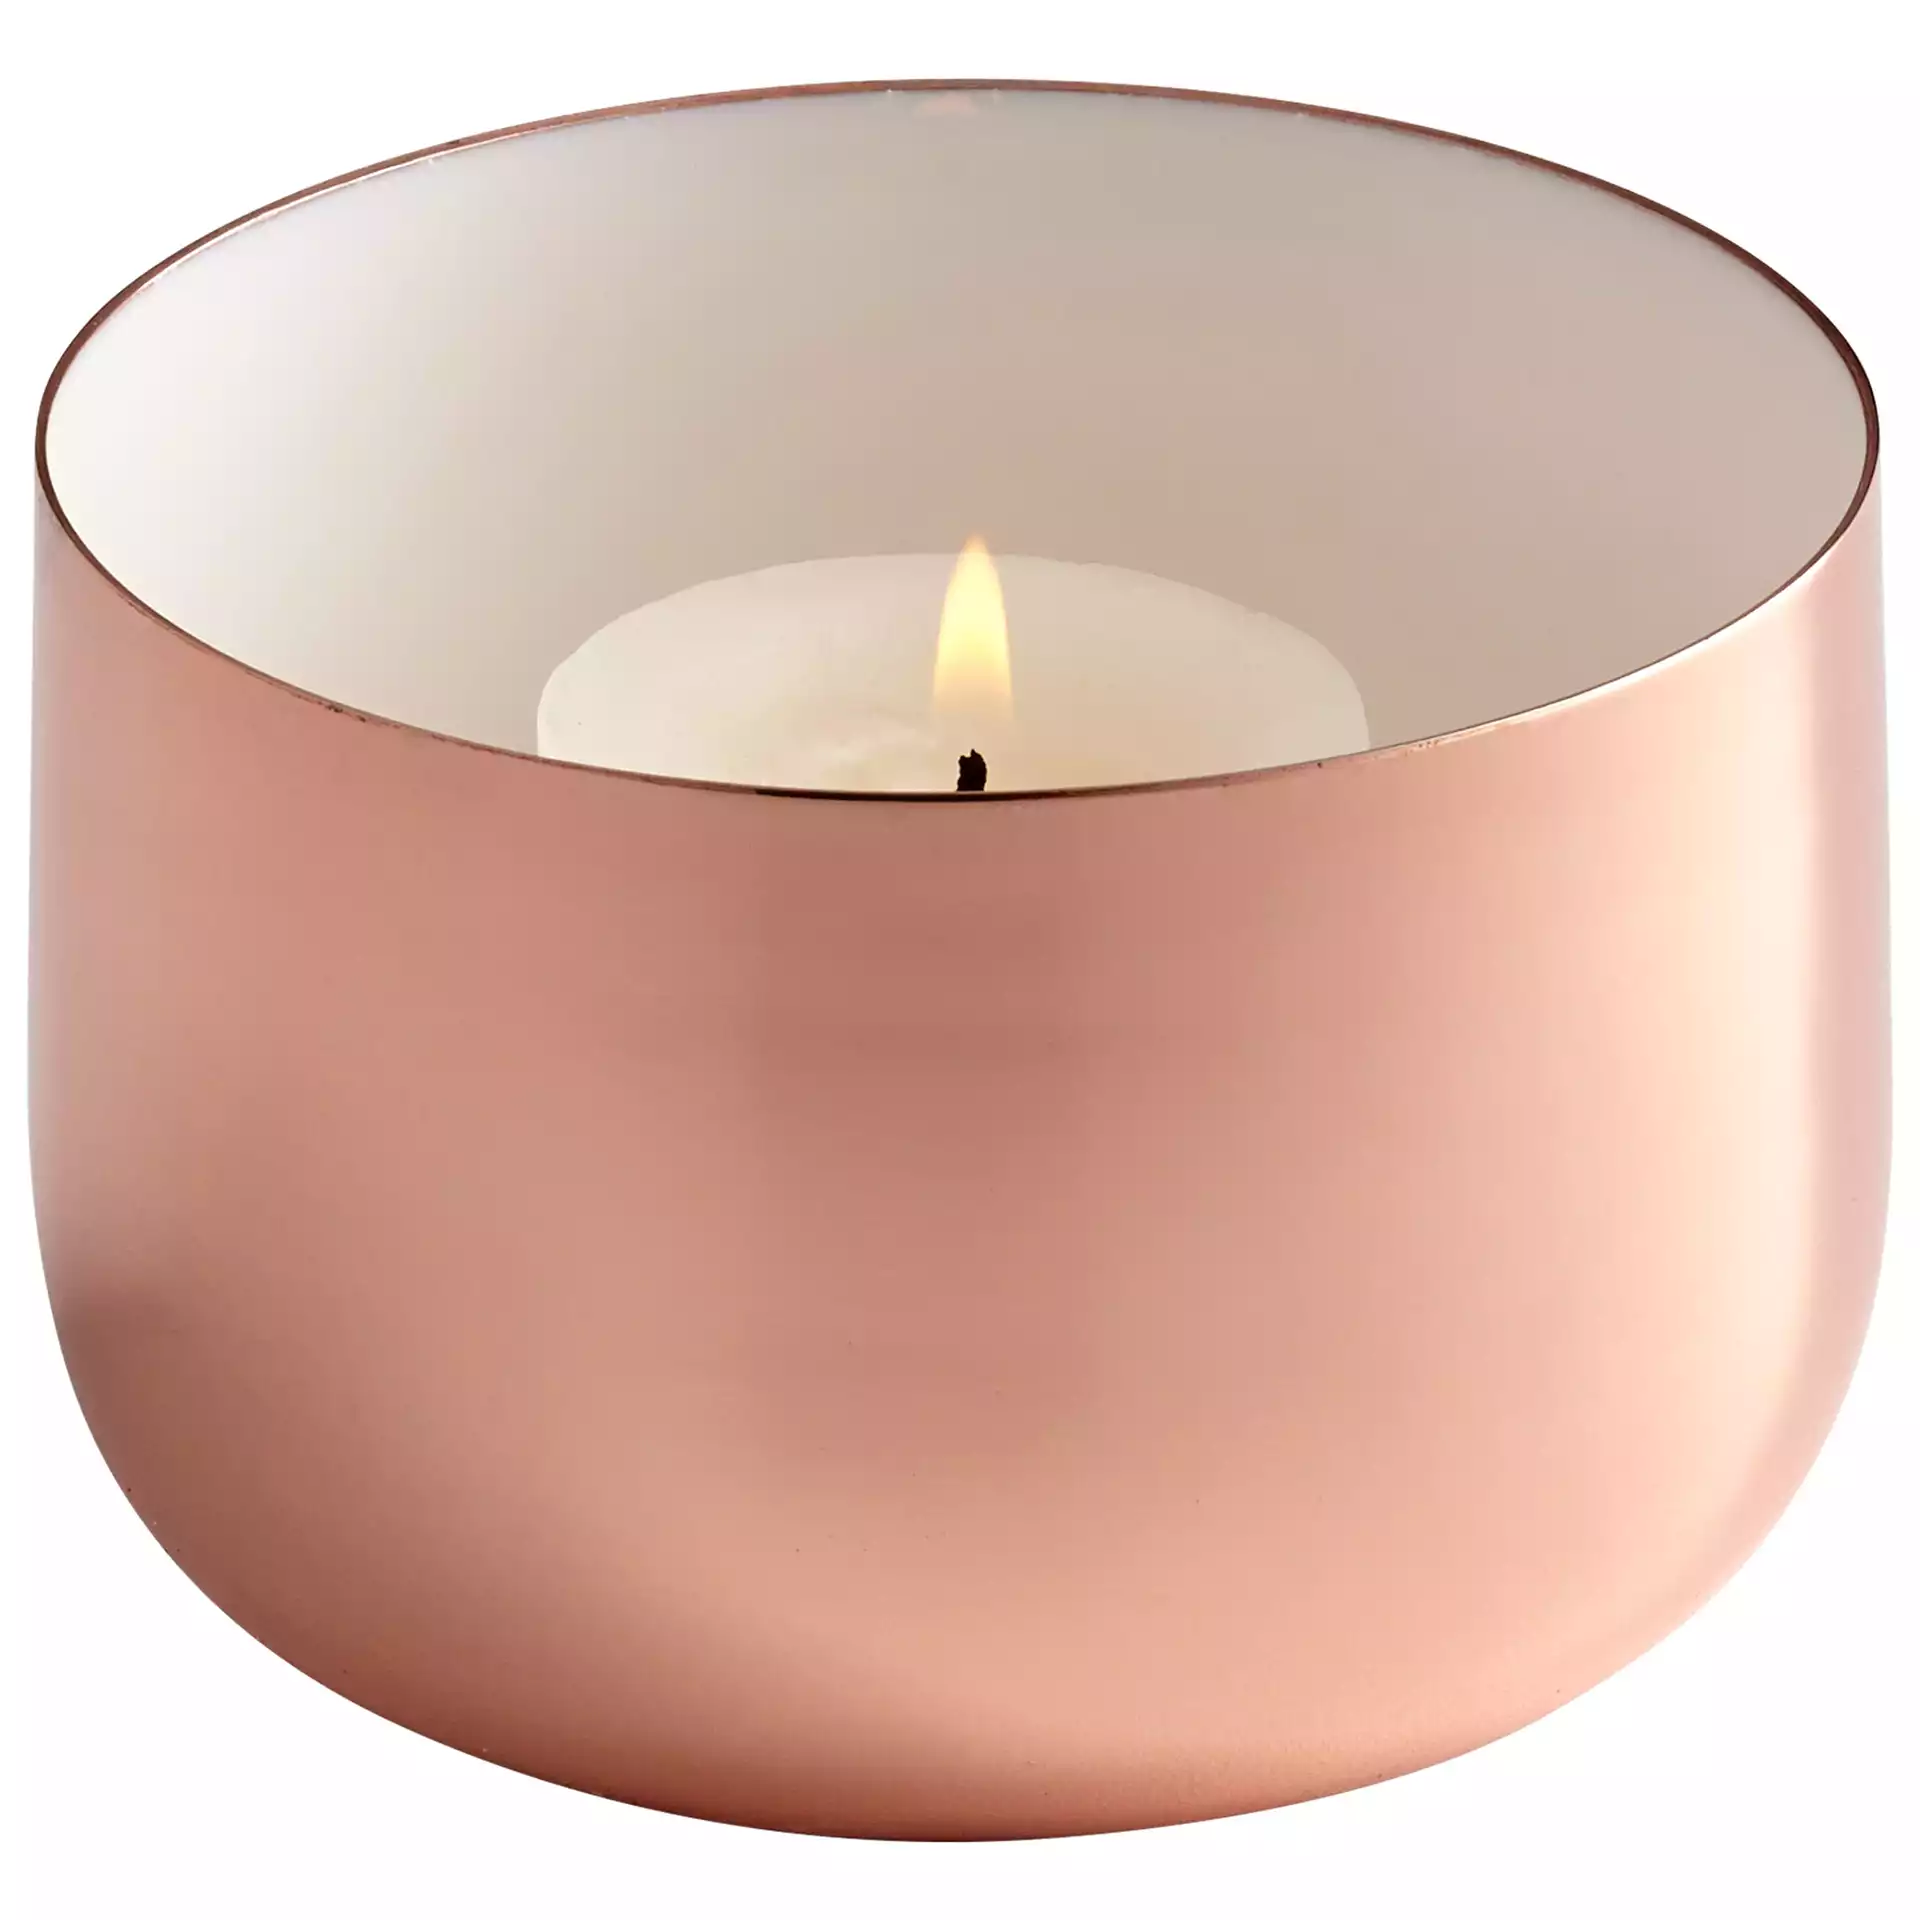 Cup O' Candle, Copper & White